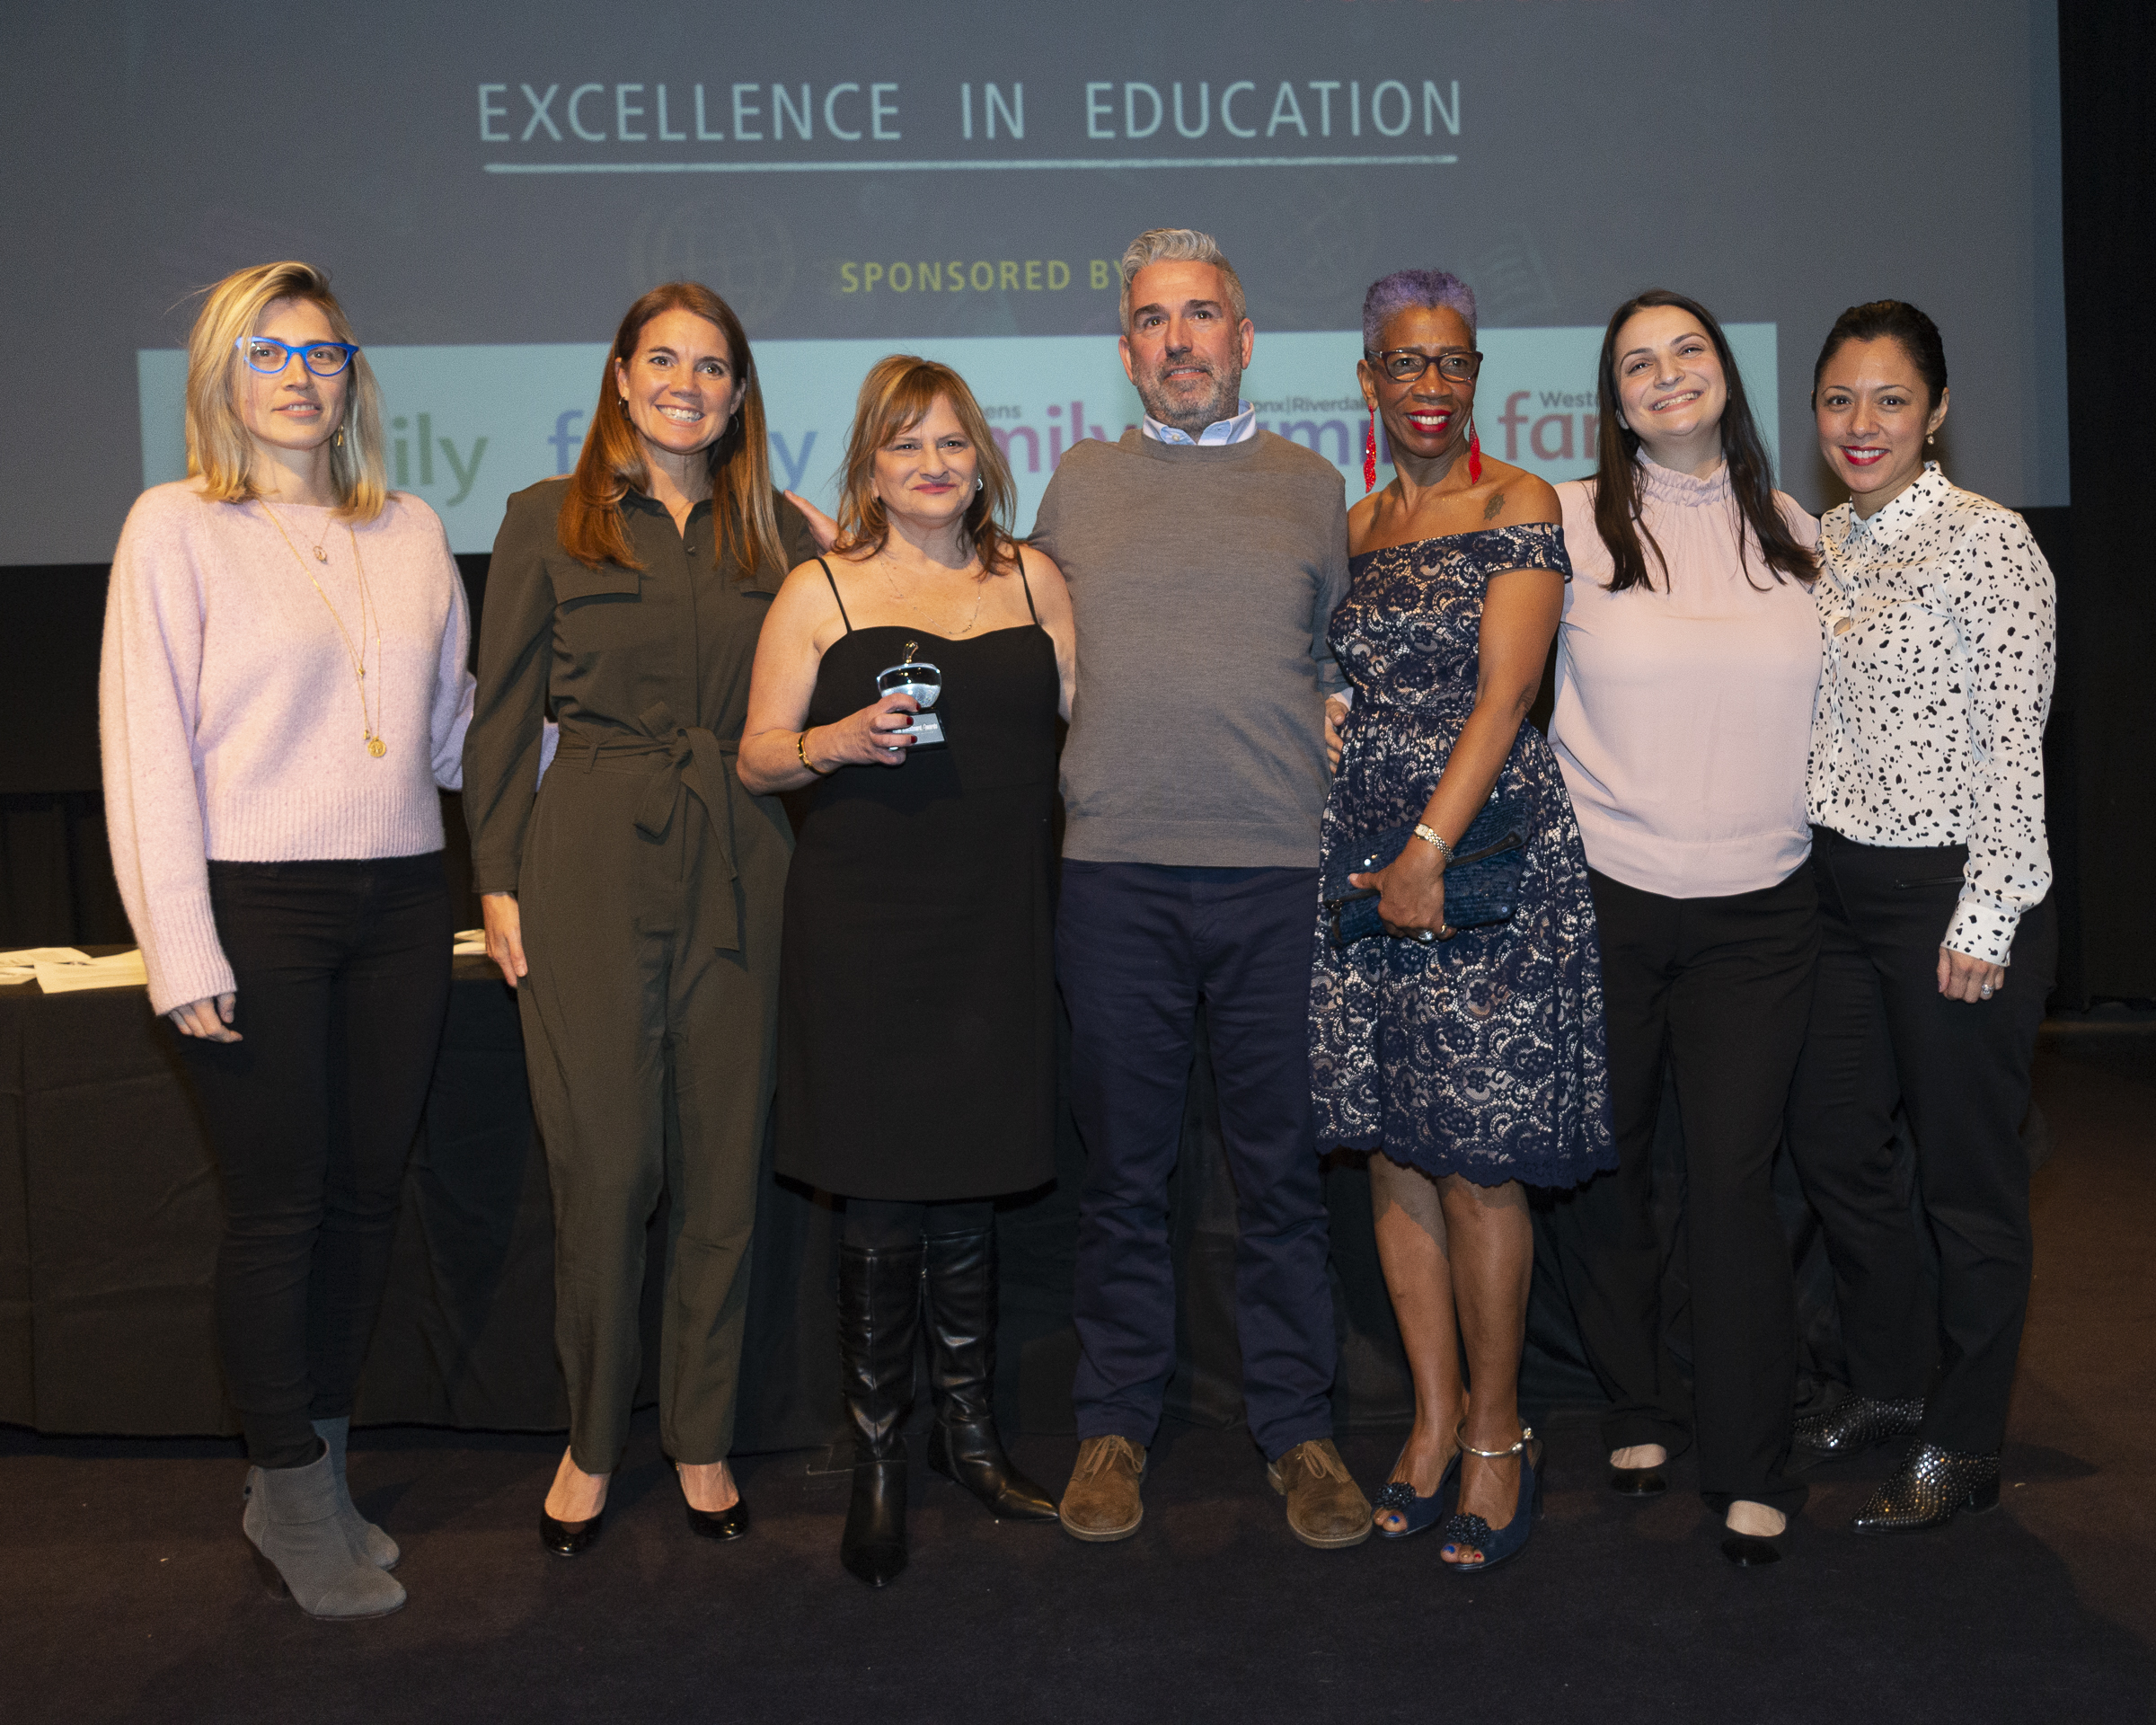 The 2019 Blackboard Awards for Schools and Principals